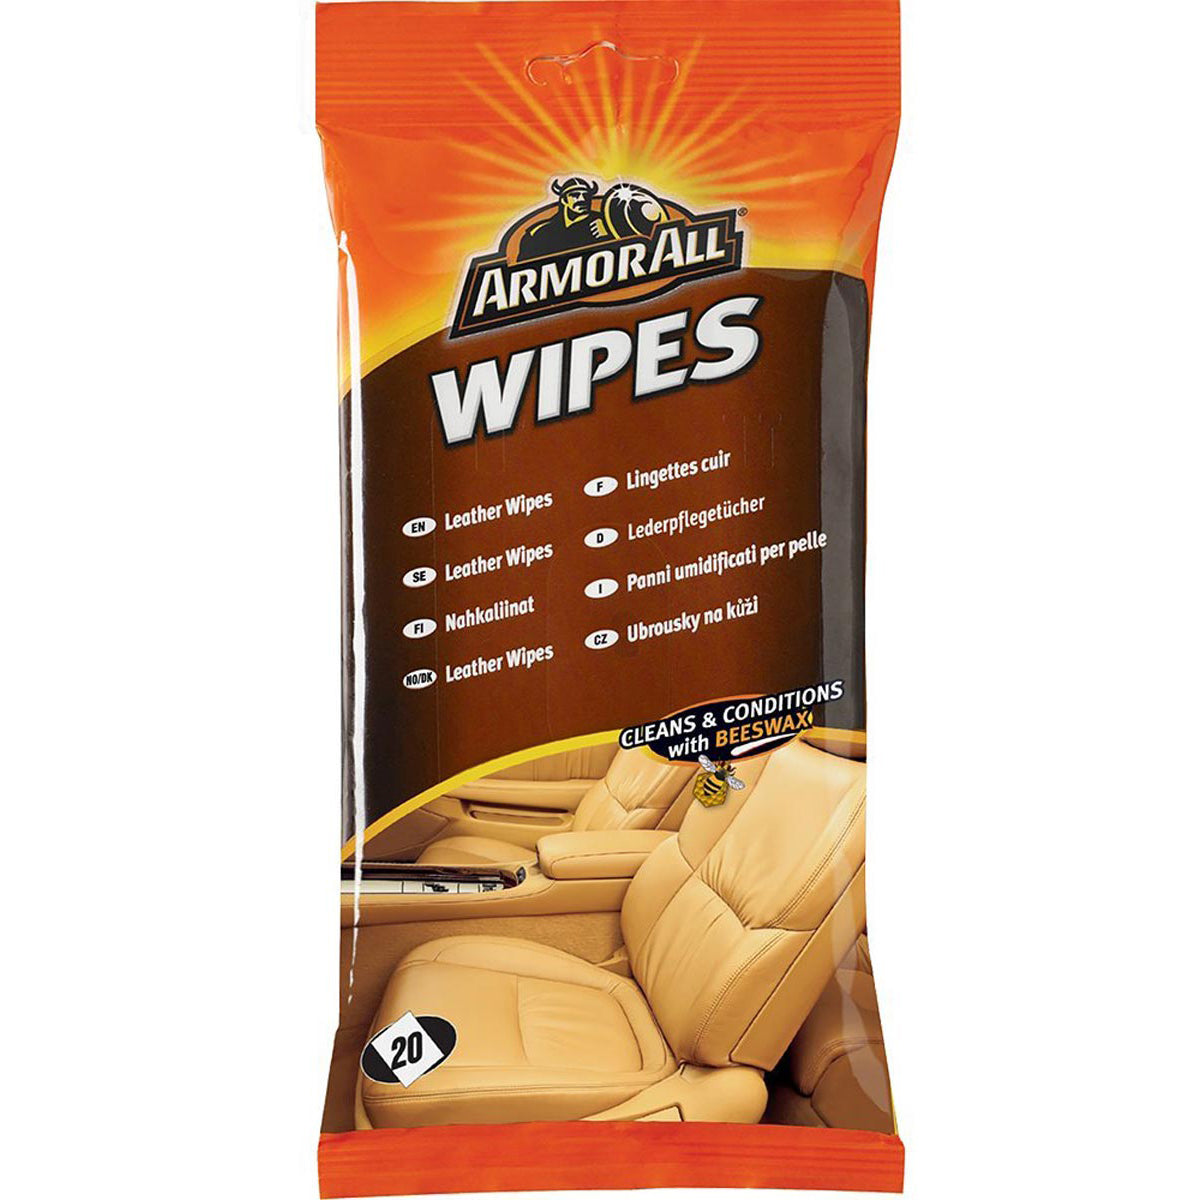 Armor All Leather Wipes - 20 Wipes Pack